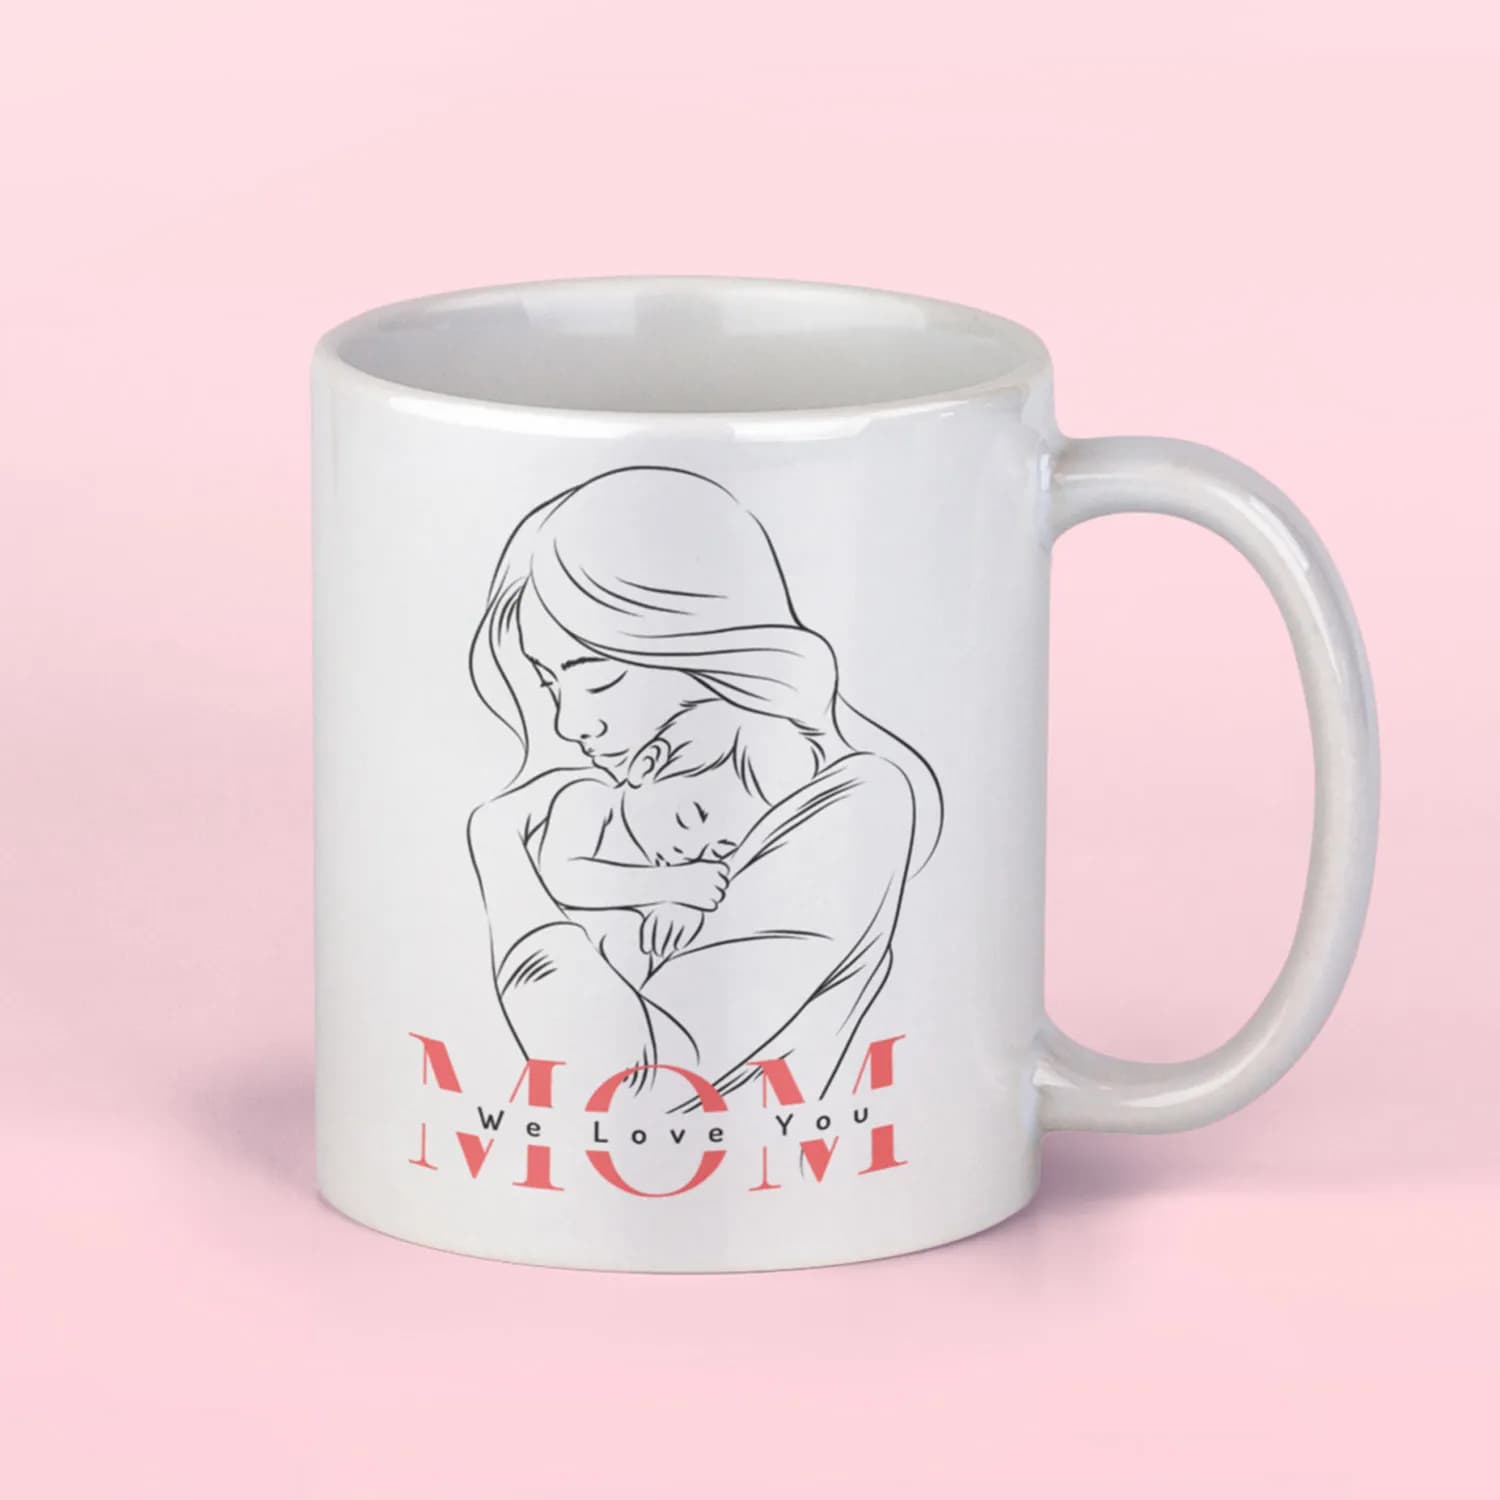 Special Mug For Mothers Day